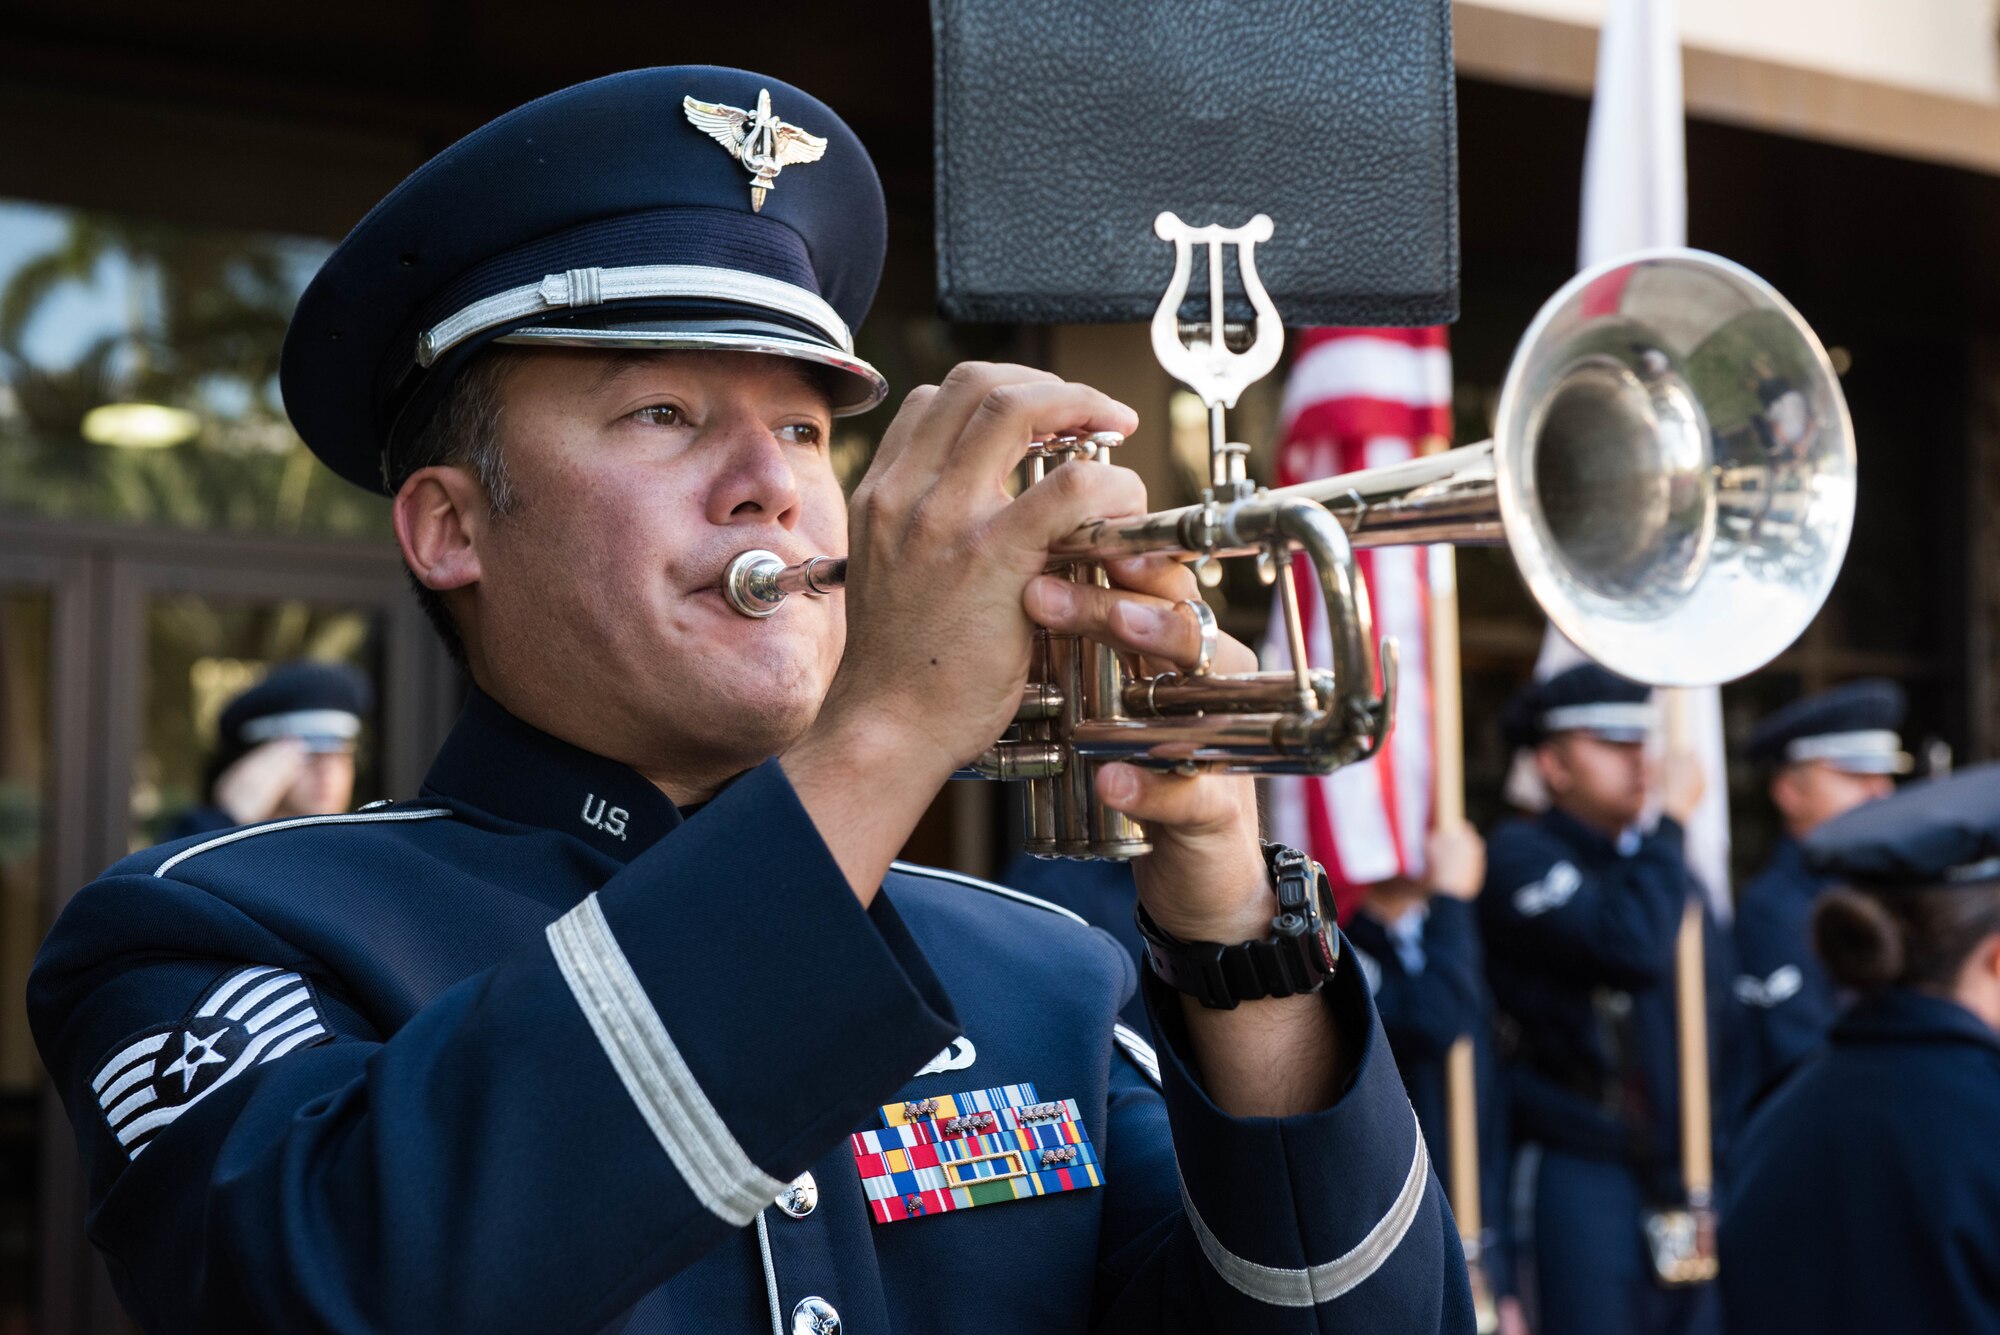 U.S. Air Force Band of the Pacific and U.S. Marine Corps Forces Pacific Band members prepare to Gen. Yoshinari Marumo, Japanese Air Self-Defense Force chief of staff, to Headquarters Pacific Air Forces on Joint Base Pearl Harbor-Hickam, Hawaii, Dec. 4, 2018. As part of his trip, Marumo met with PACAF leadership to discuss the PACAF strategy and future engagements. The U.S. and Japan routinely work together to promote security cooperation and support a free and open Indo-Pacific region. (U.S. Air Force photo/Staff Sgt. Hailey Haux)